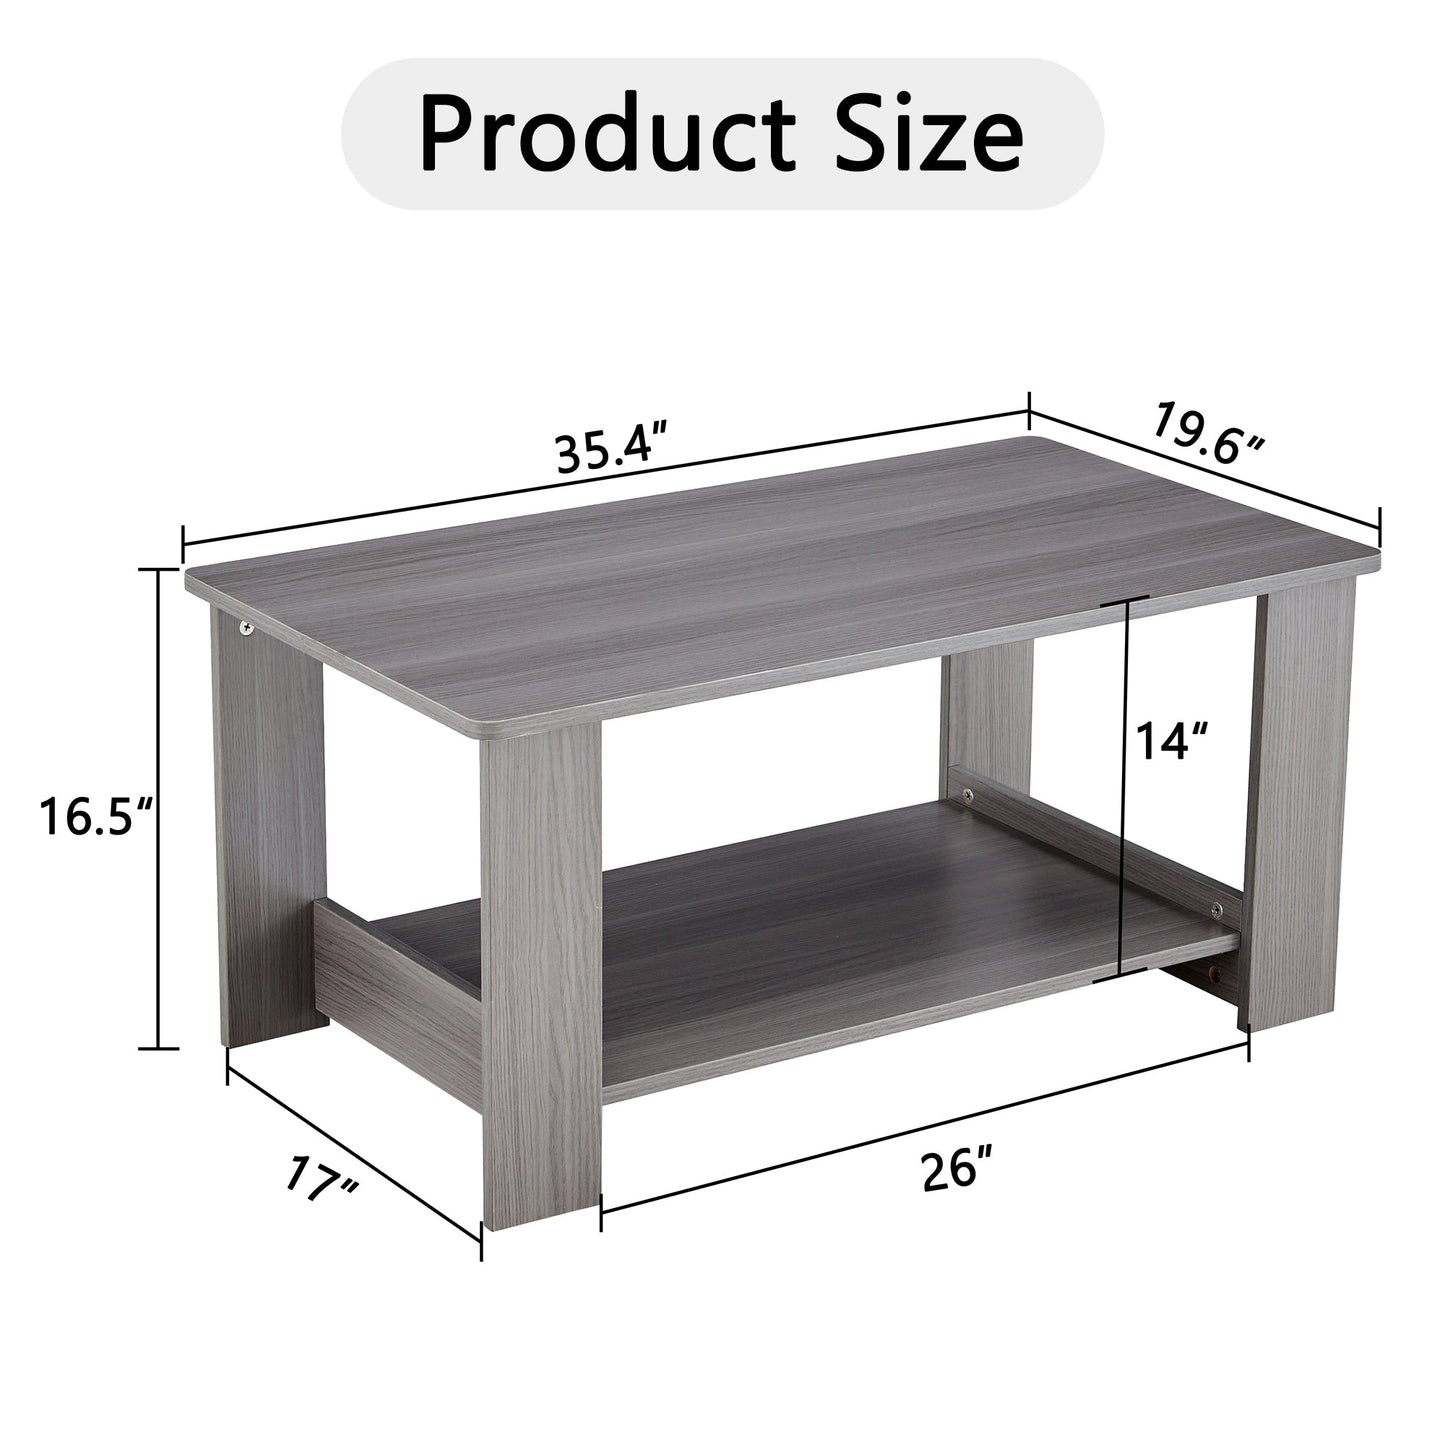 Modern minimalist gray wood grain double layered rectangular coffee table,tea table.MDF material is more durable,Suitable for living room, bedroom, and study room.19.6"*35.4"*16.5" CT-16